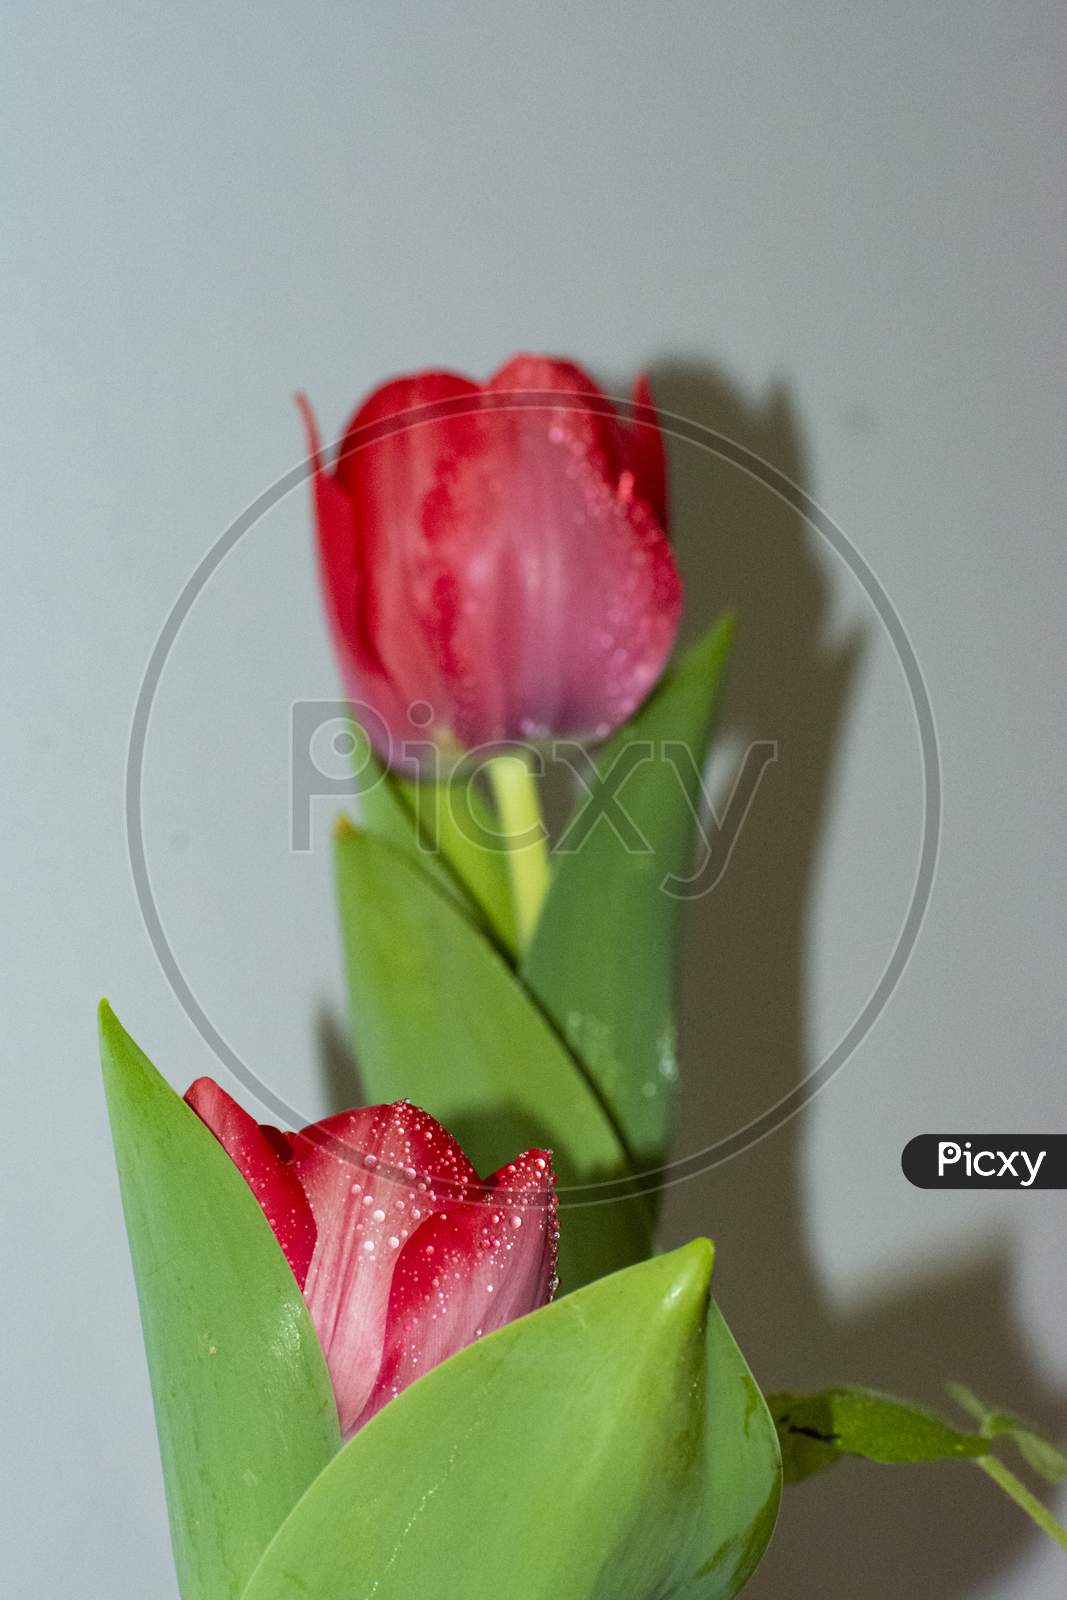 A close up red tulip flower with droplets of water